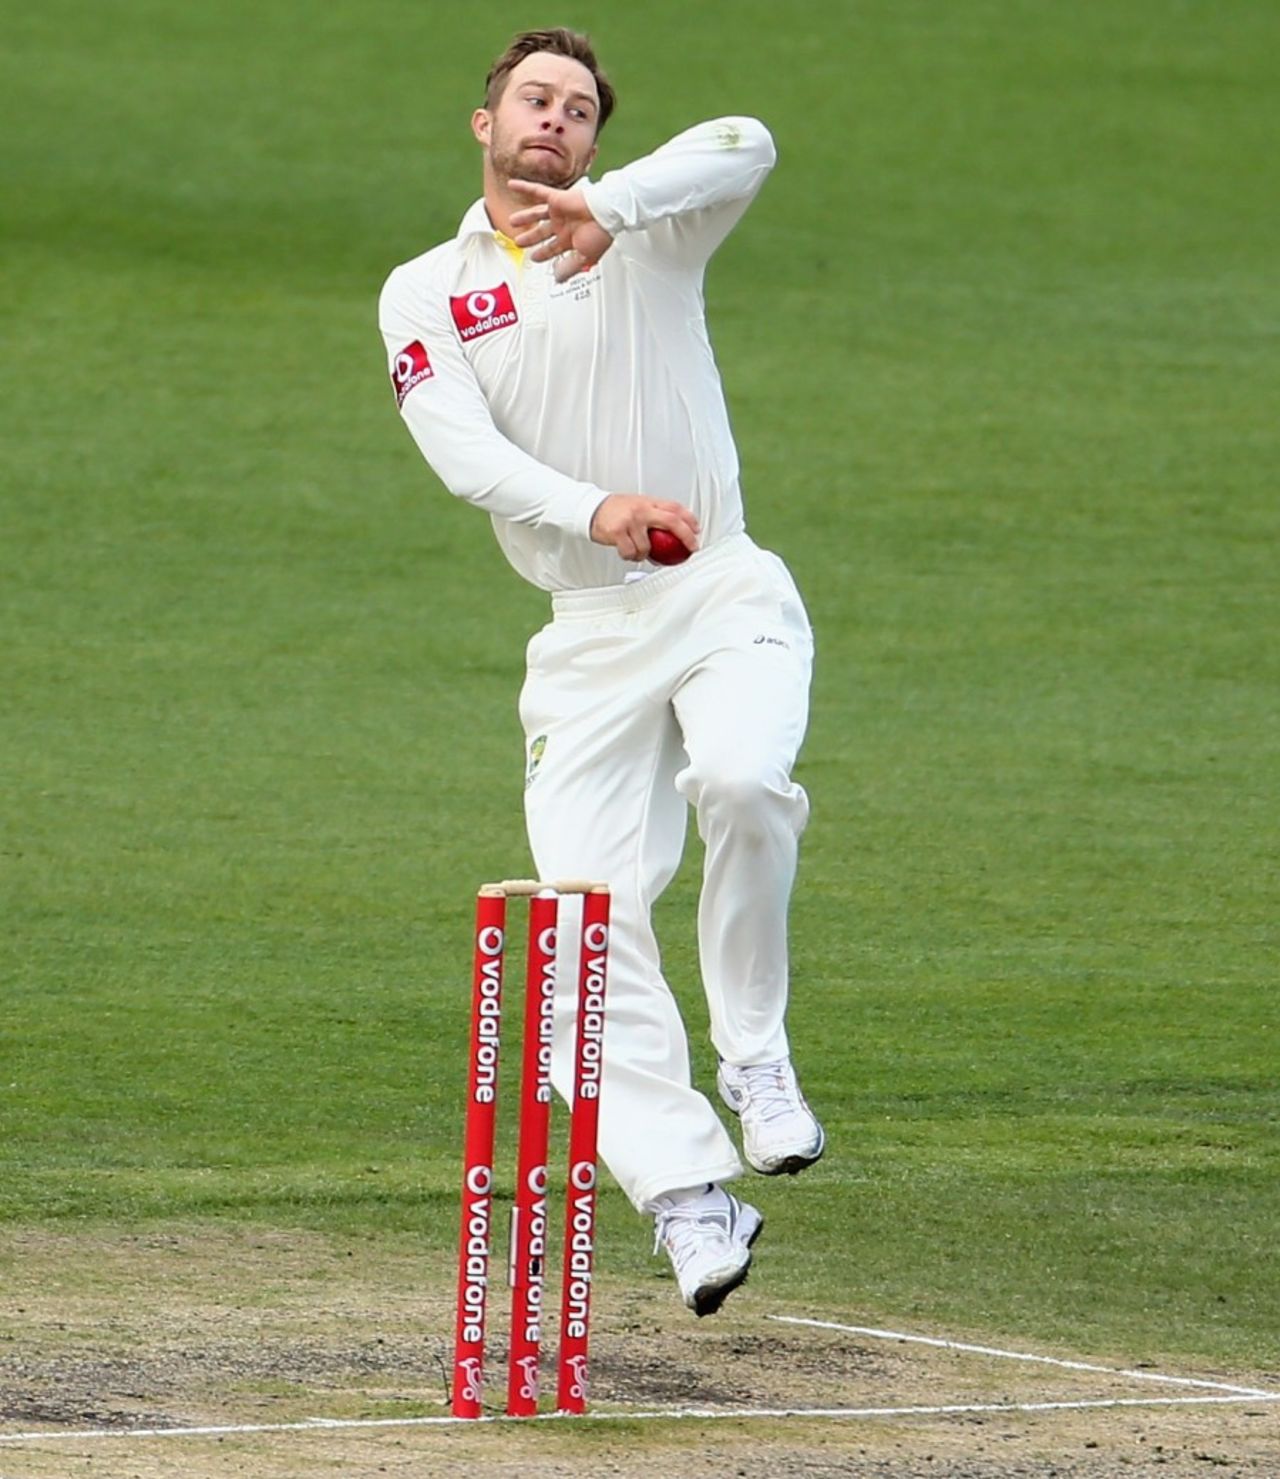 Matthew Wade bowls his first over in first-class cricket, Australia v Sri Lanka, 1st Test, Hobart, 5th day, December 18, 2012